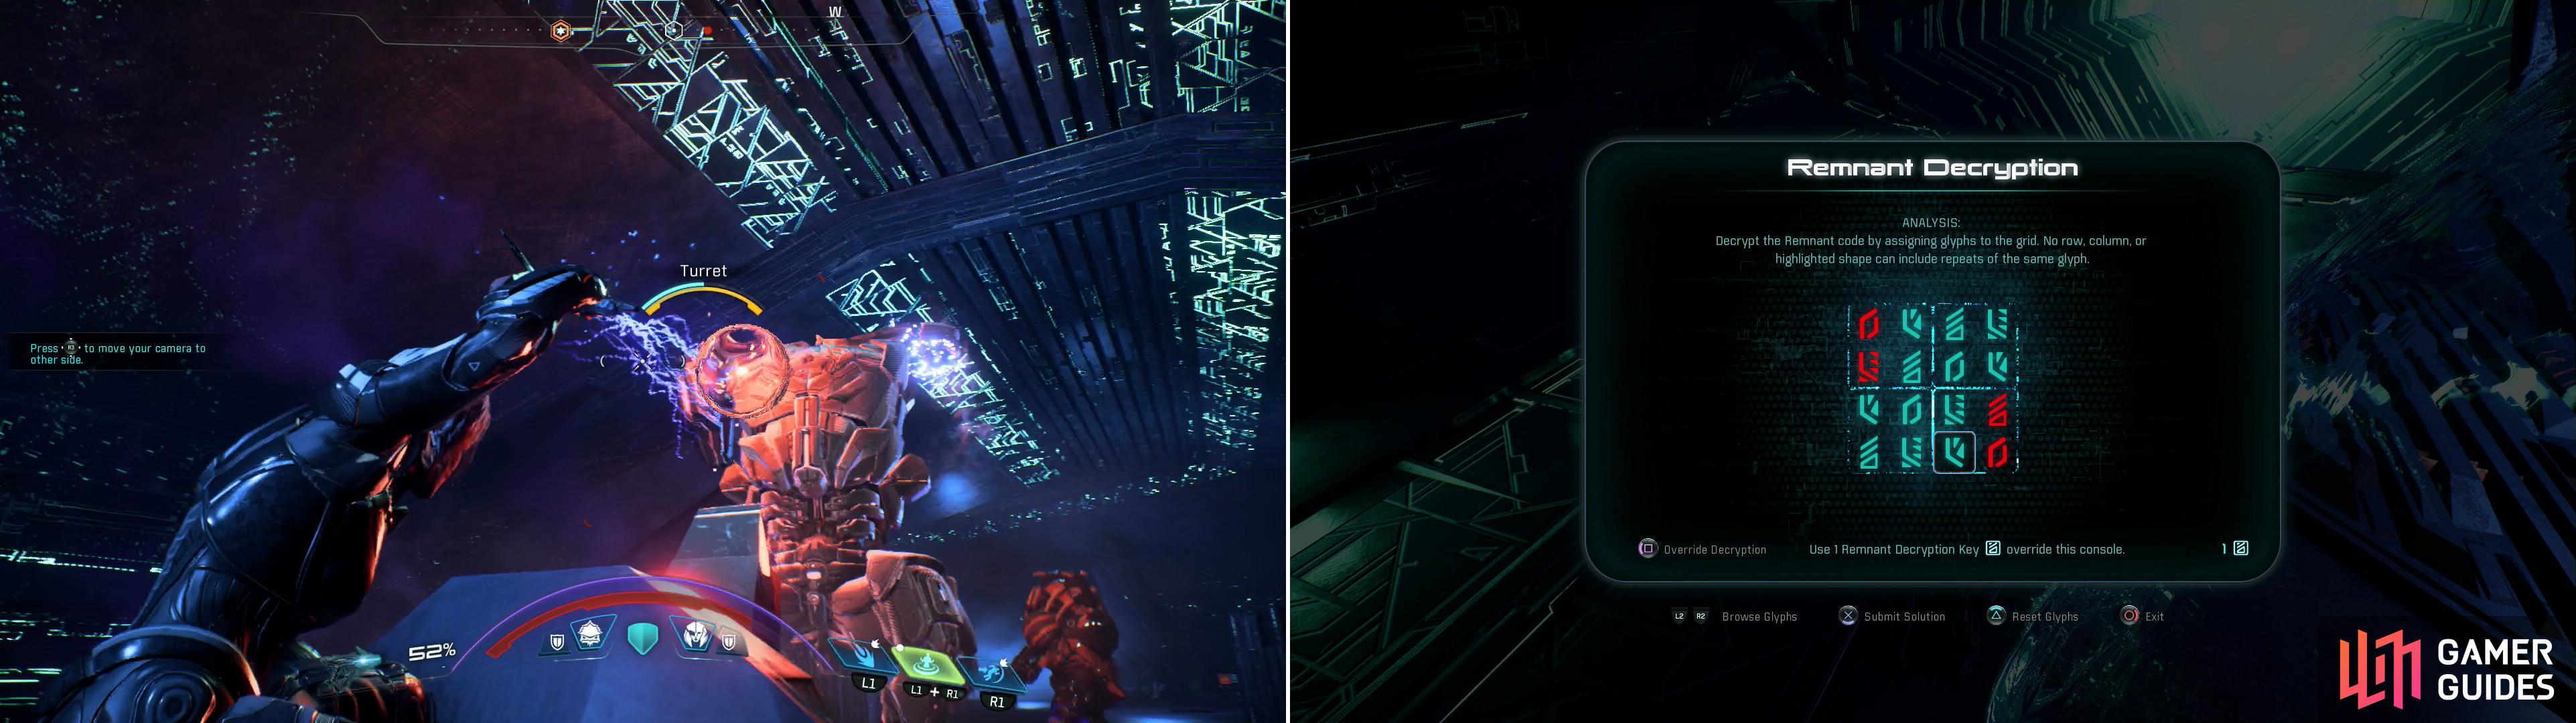 Defeat a mighty Destroyer (left), then solve a Remnant puzzle (right) to gain a permanent boost to your skill points.